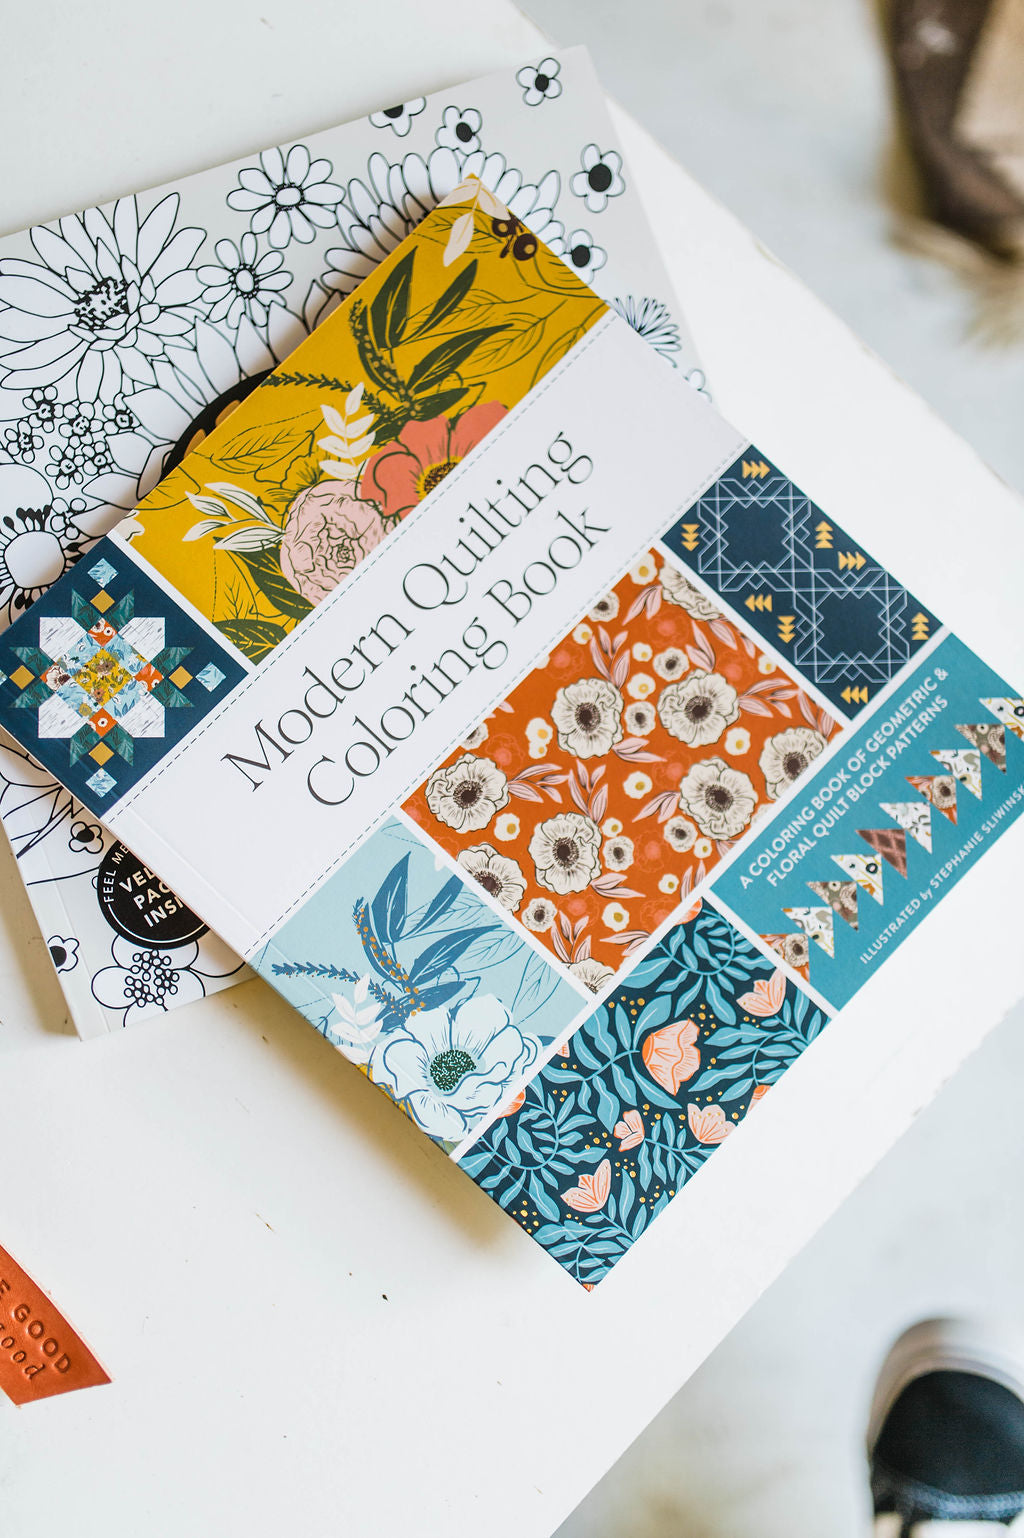 modern quilting coloring book by stephanie sliwinski | coloring book